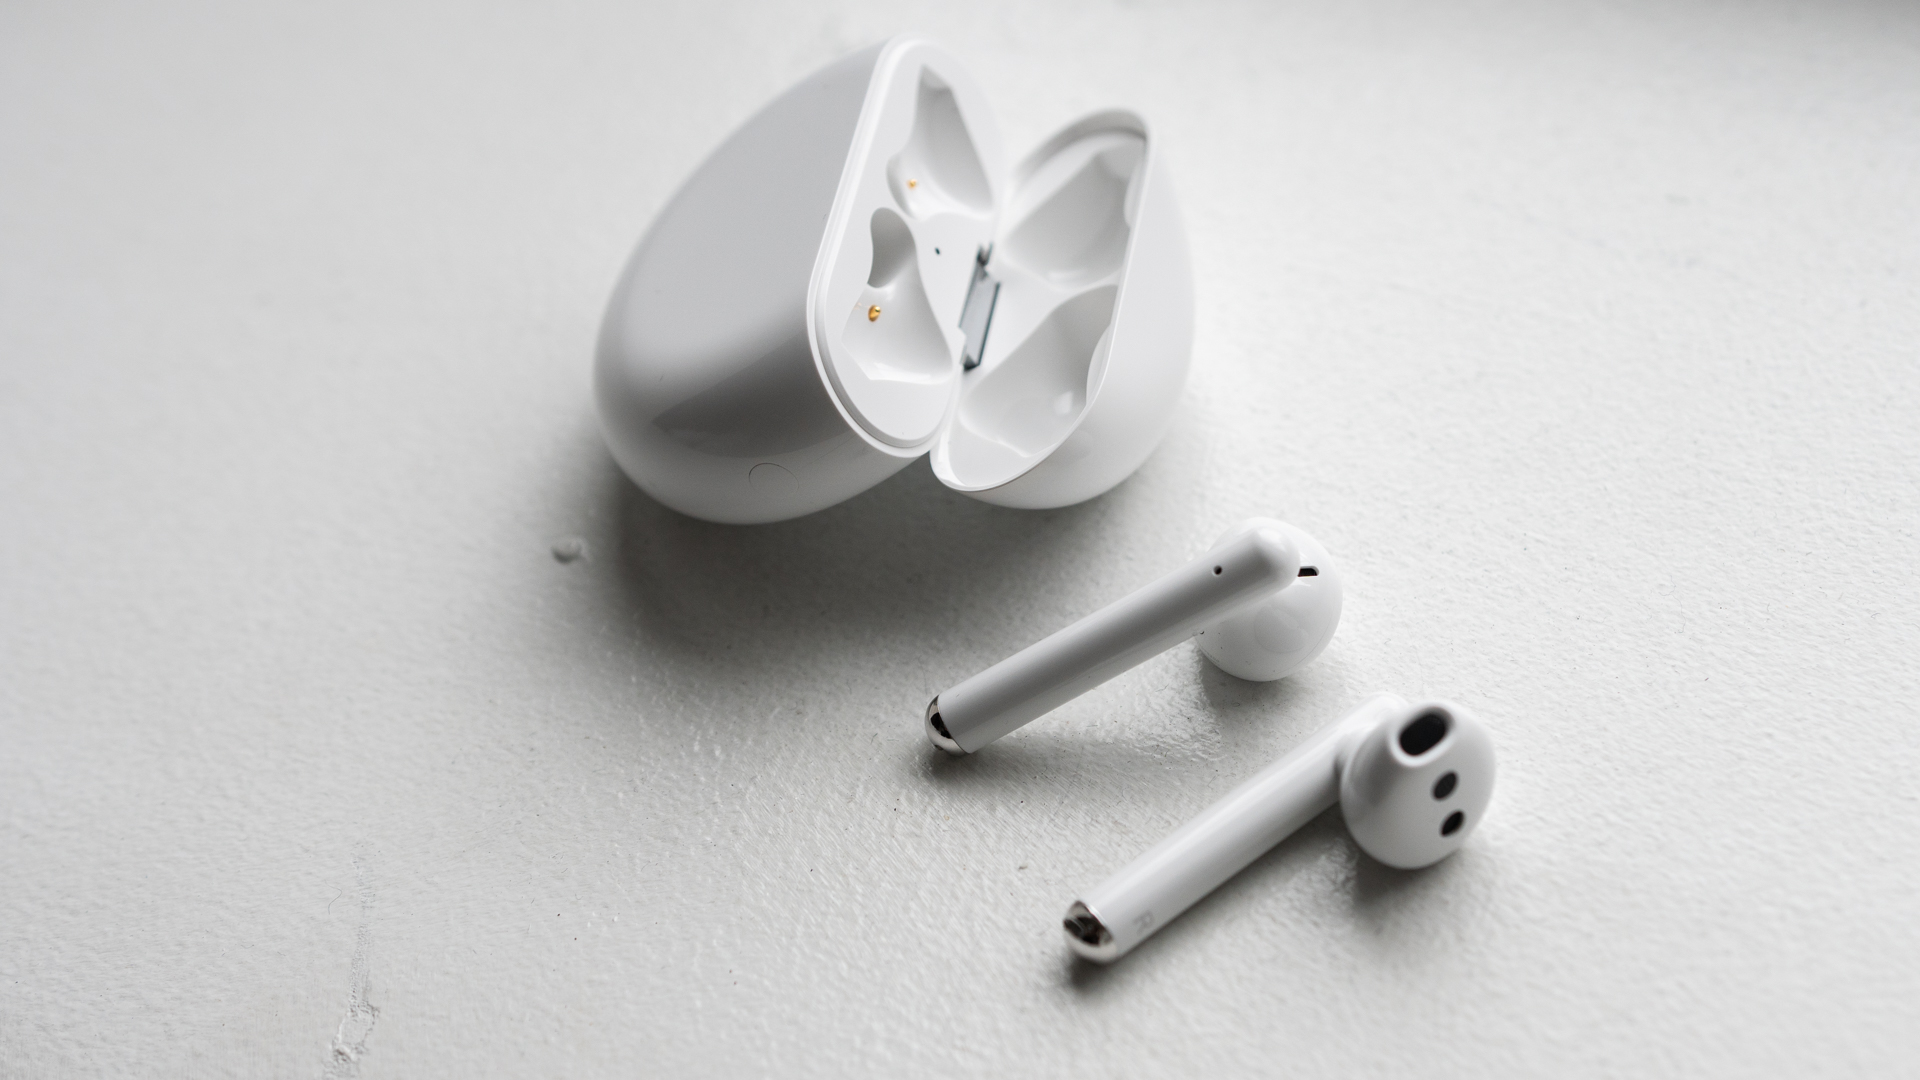 Huawei Freebuds 3 earbuds next to open charging case on white background.